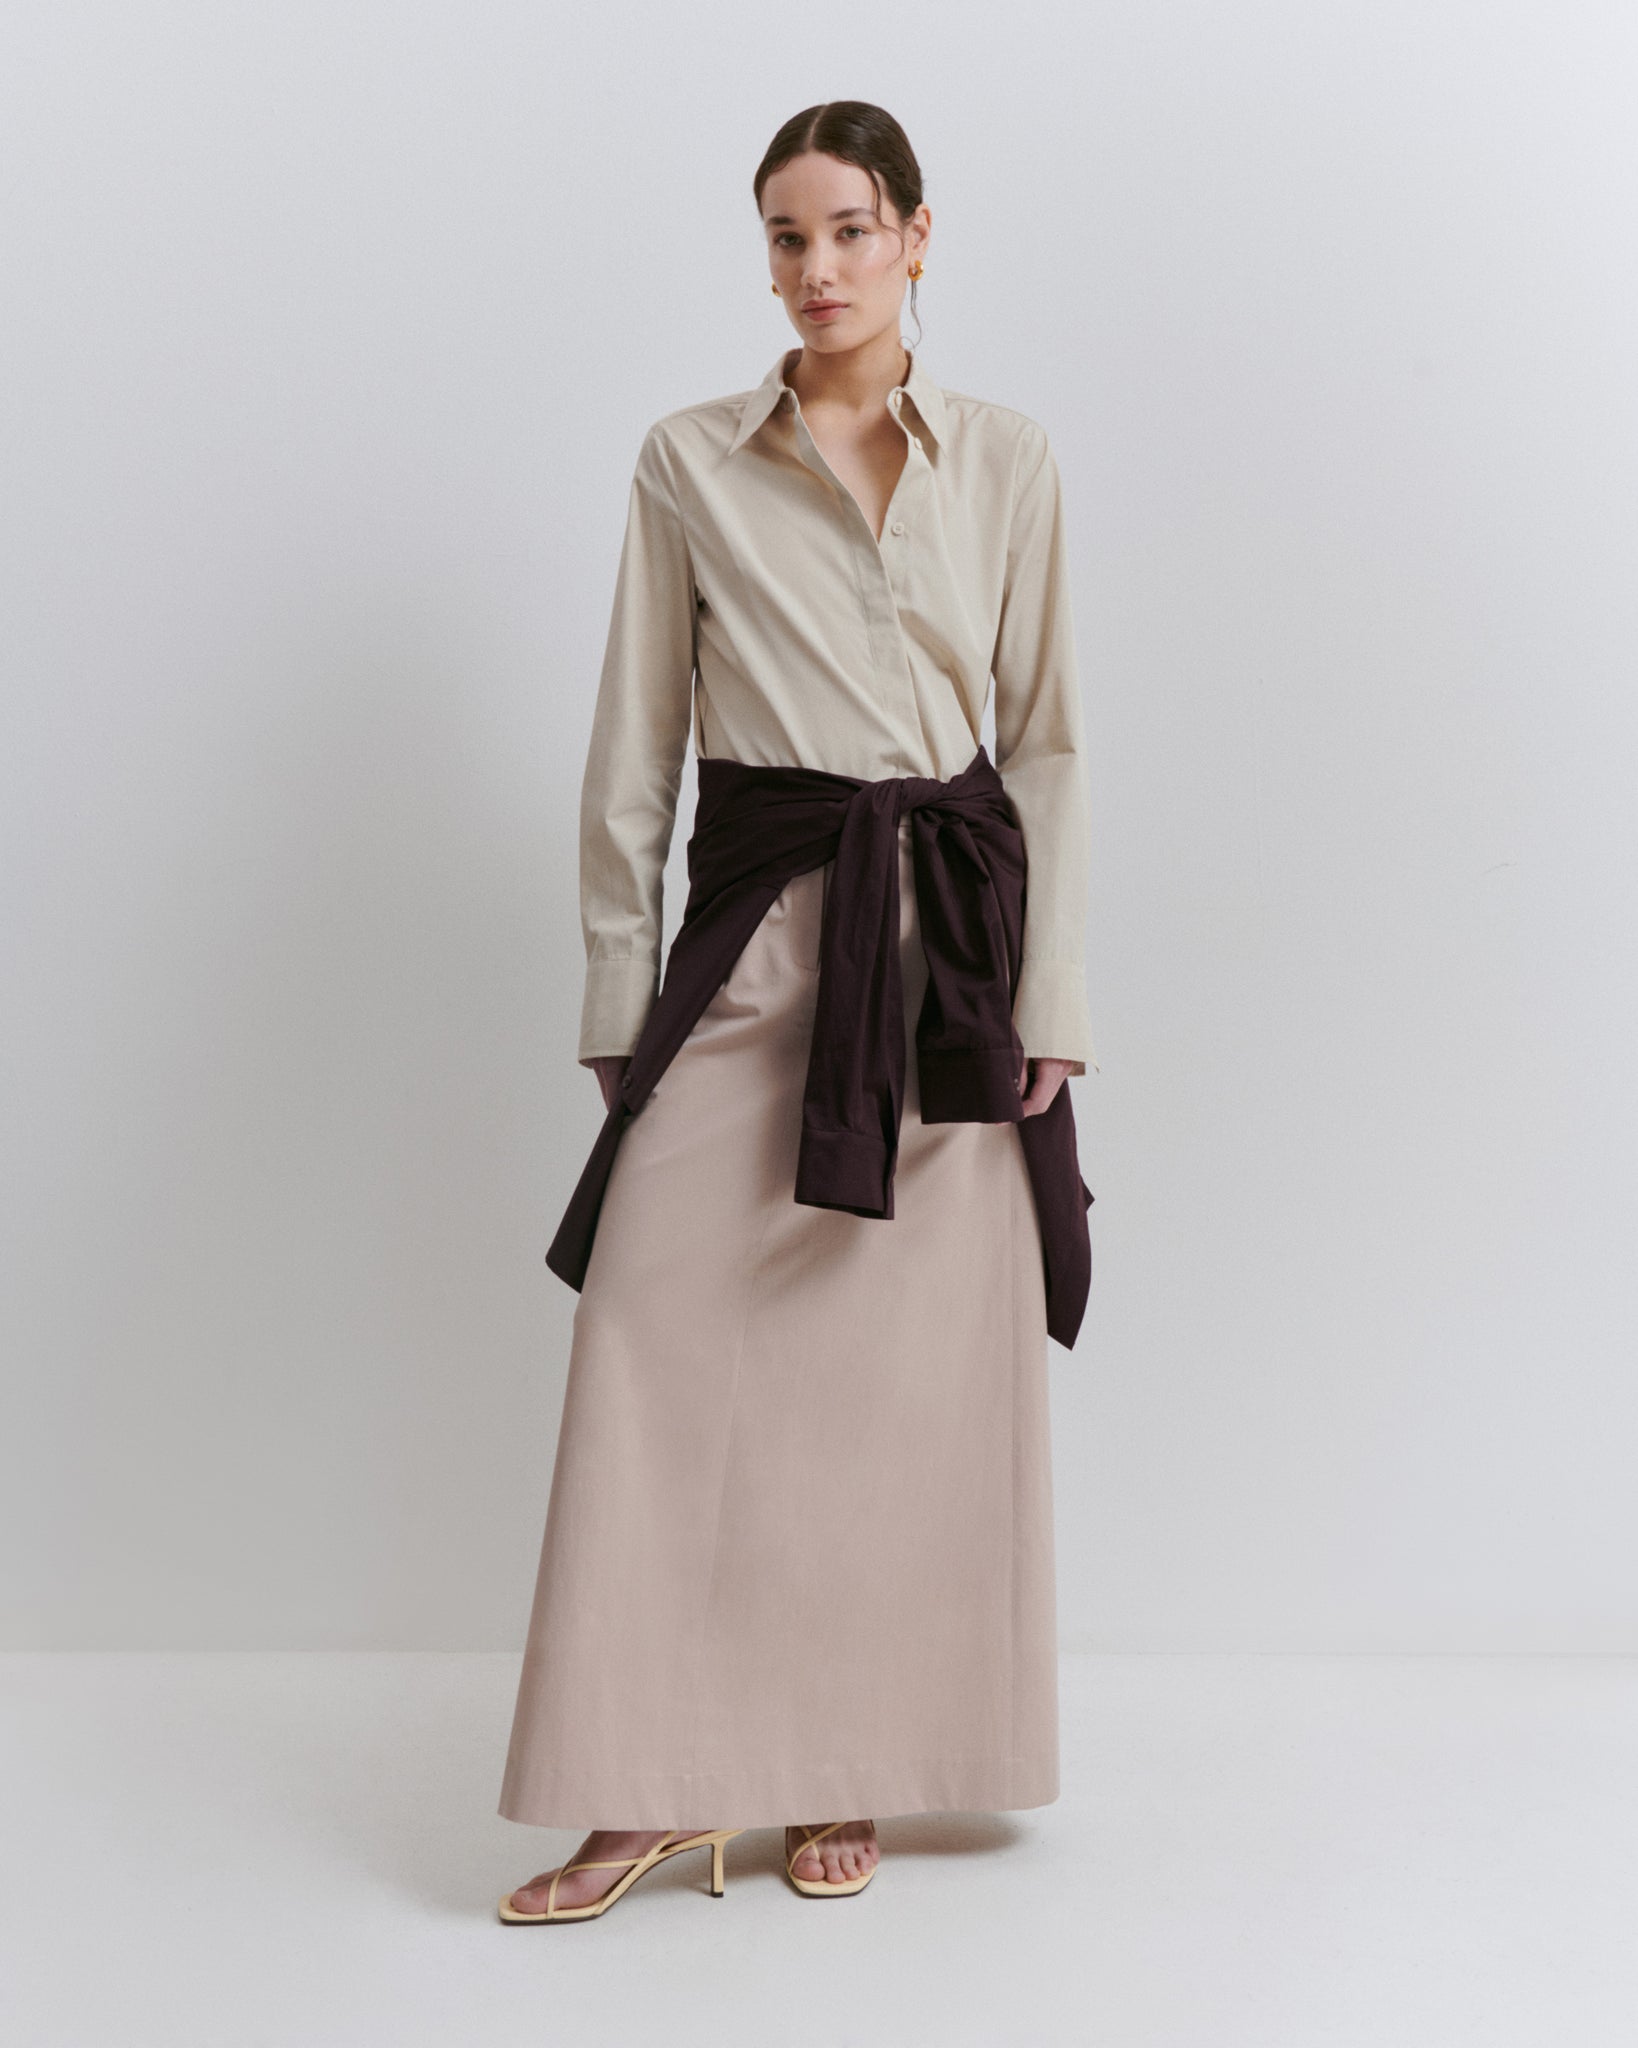 model wears Issue Twelve blush and stone cotton shirt and maxi skirt